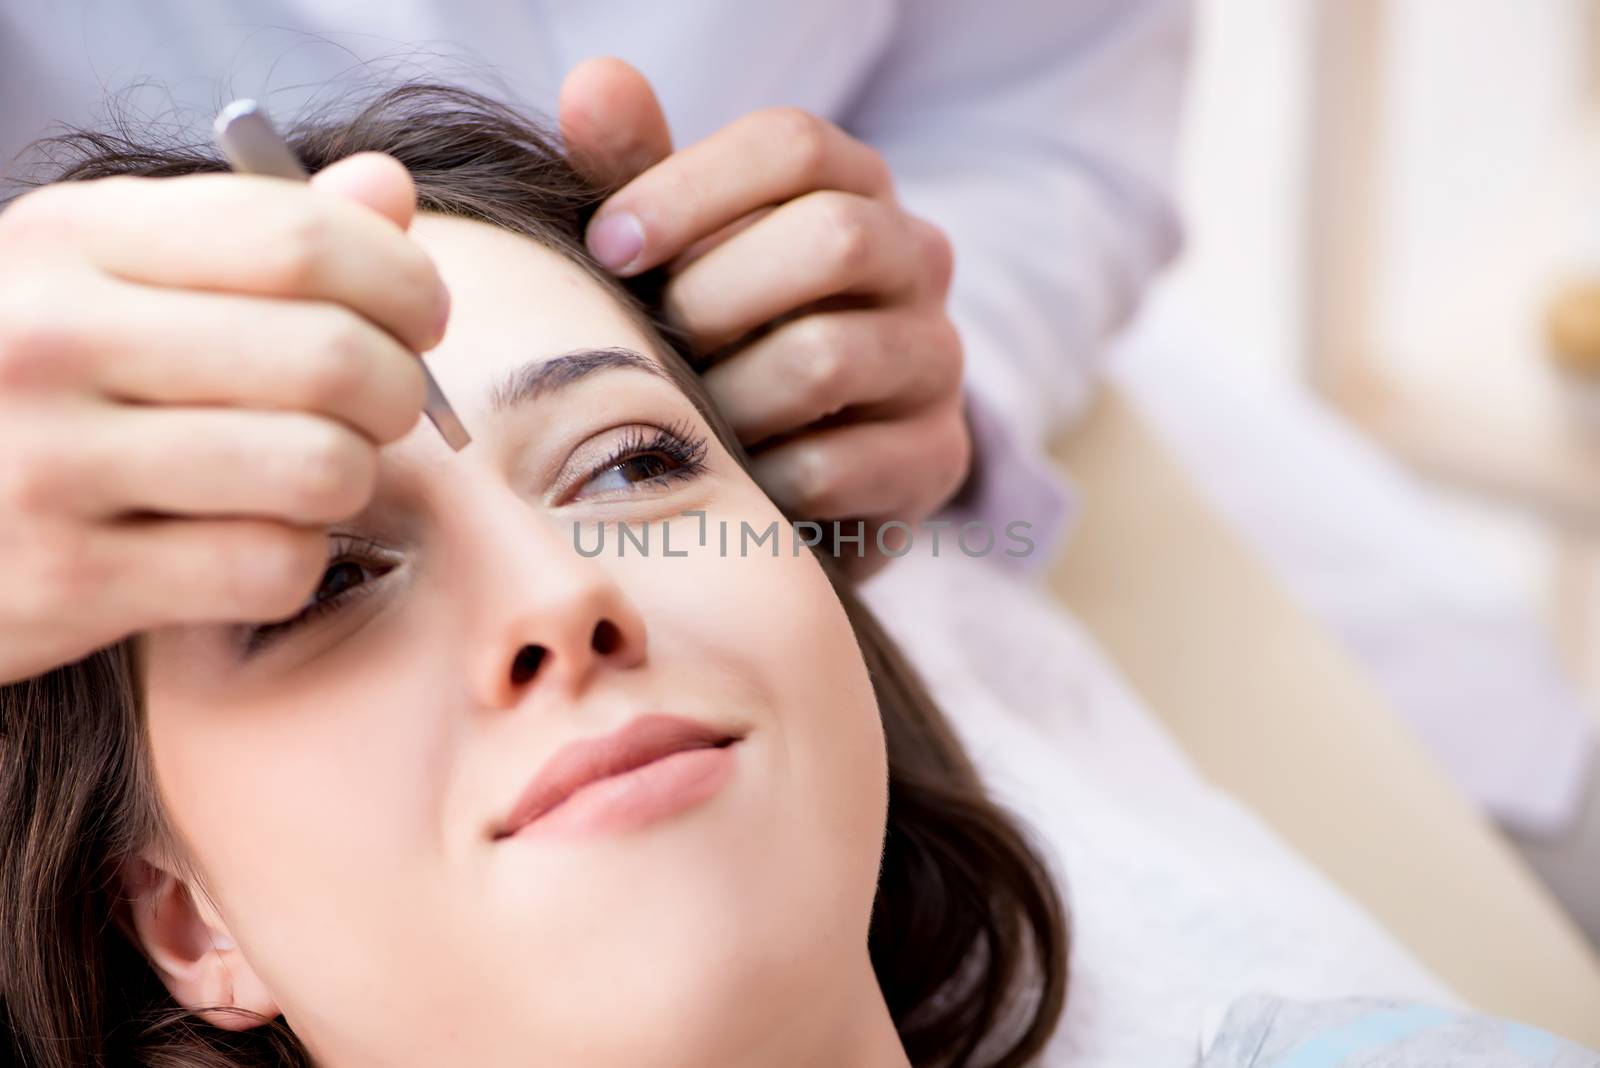 Woman visiting doctor cosmetologyst in beauty concept